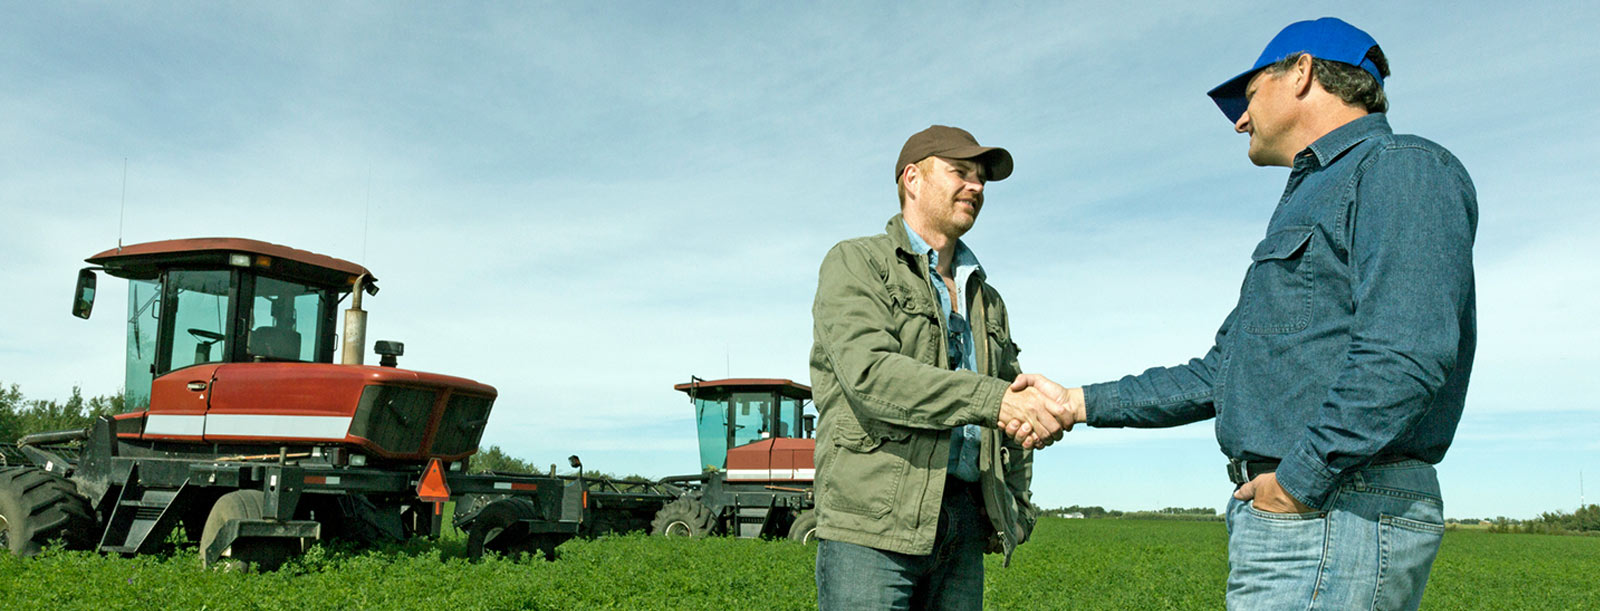 Farmer and their bank lender shaking hands.